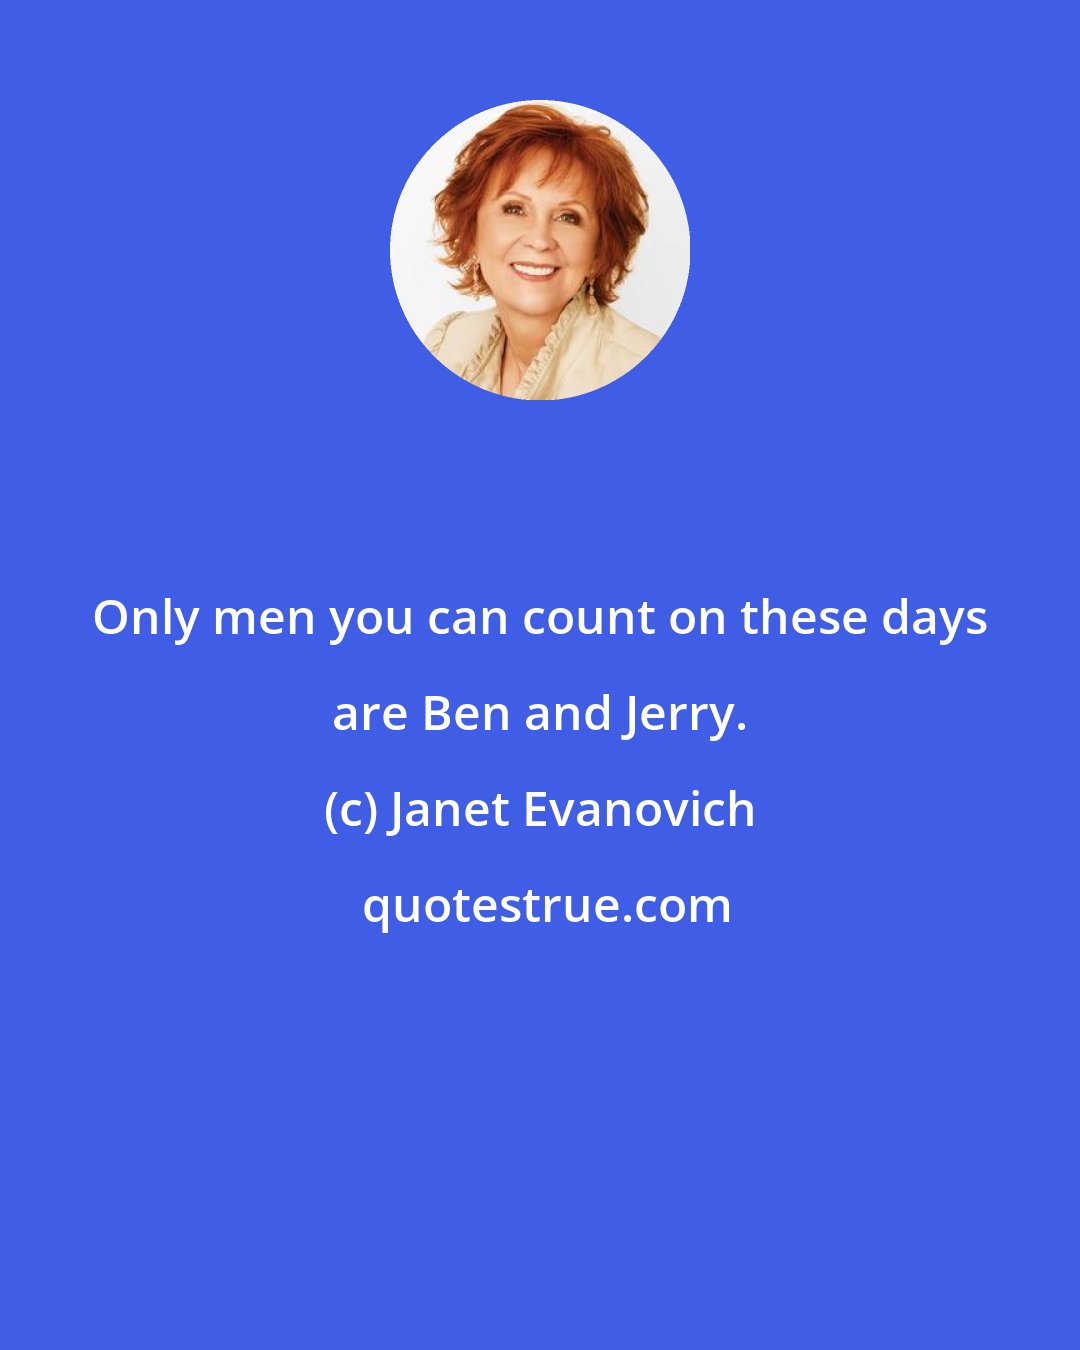 Janet Evanovich: Only men you can count on these days are Ben and Jerry.